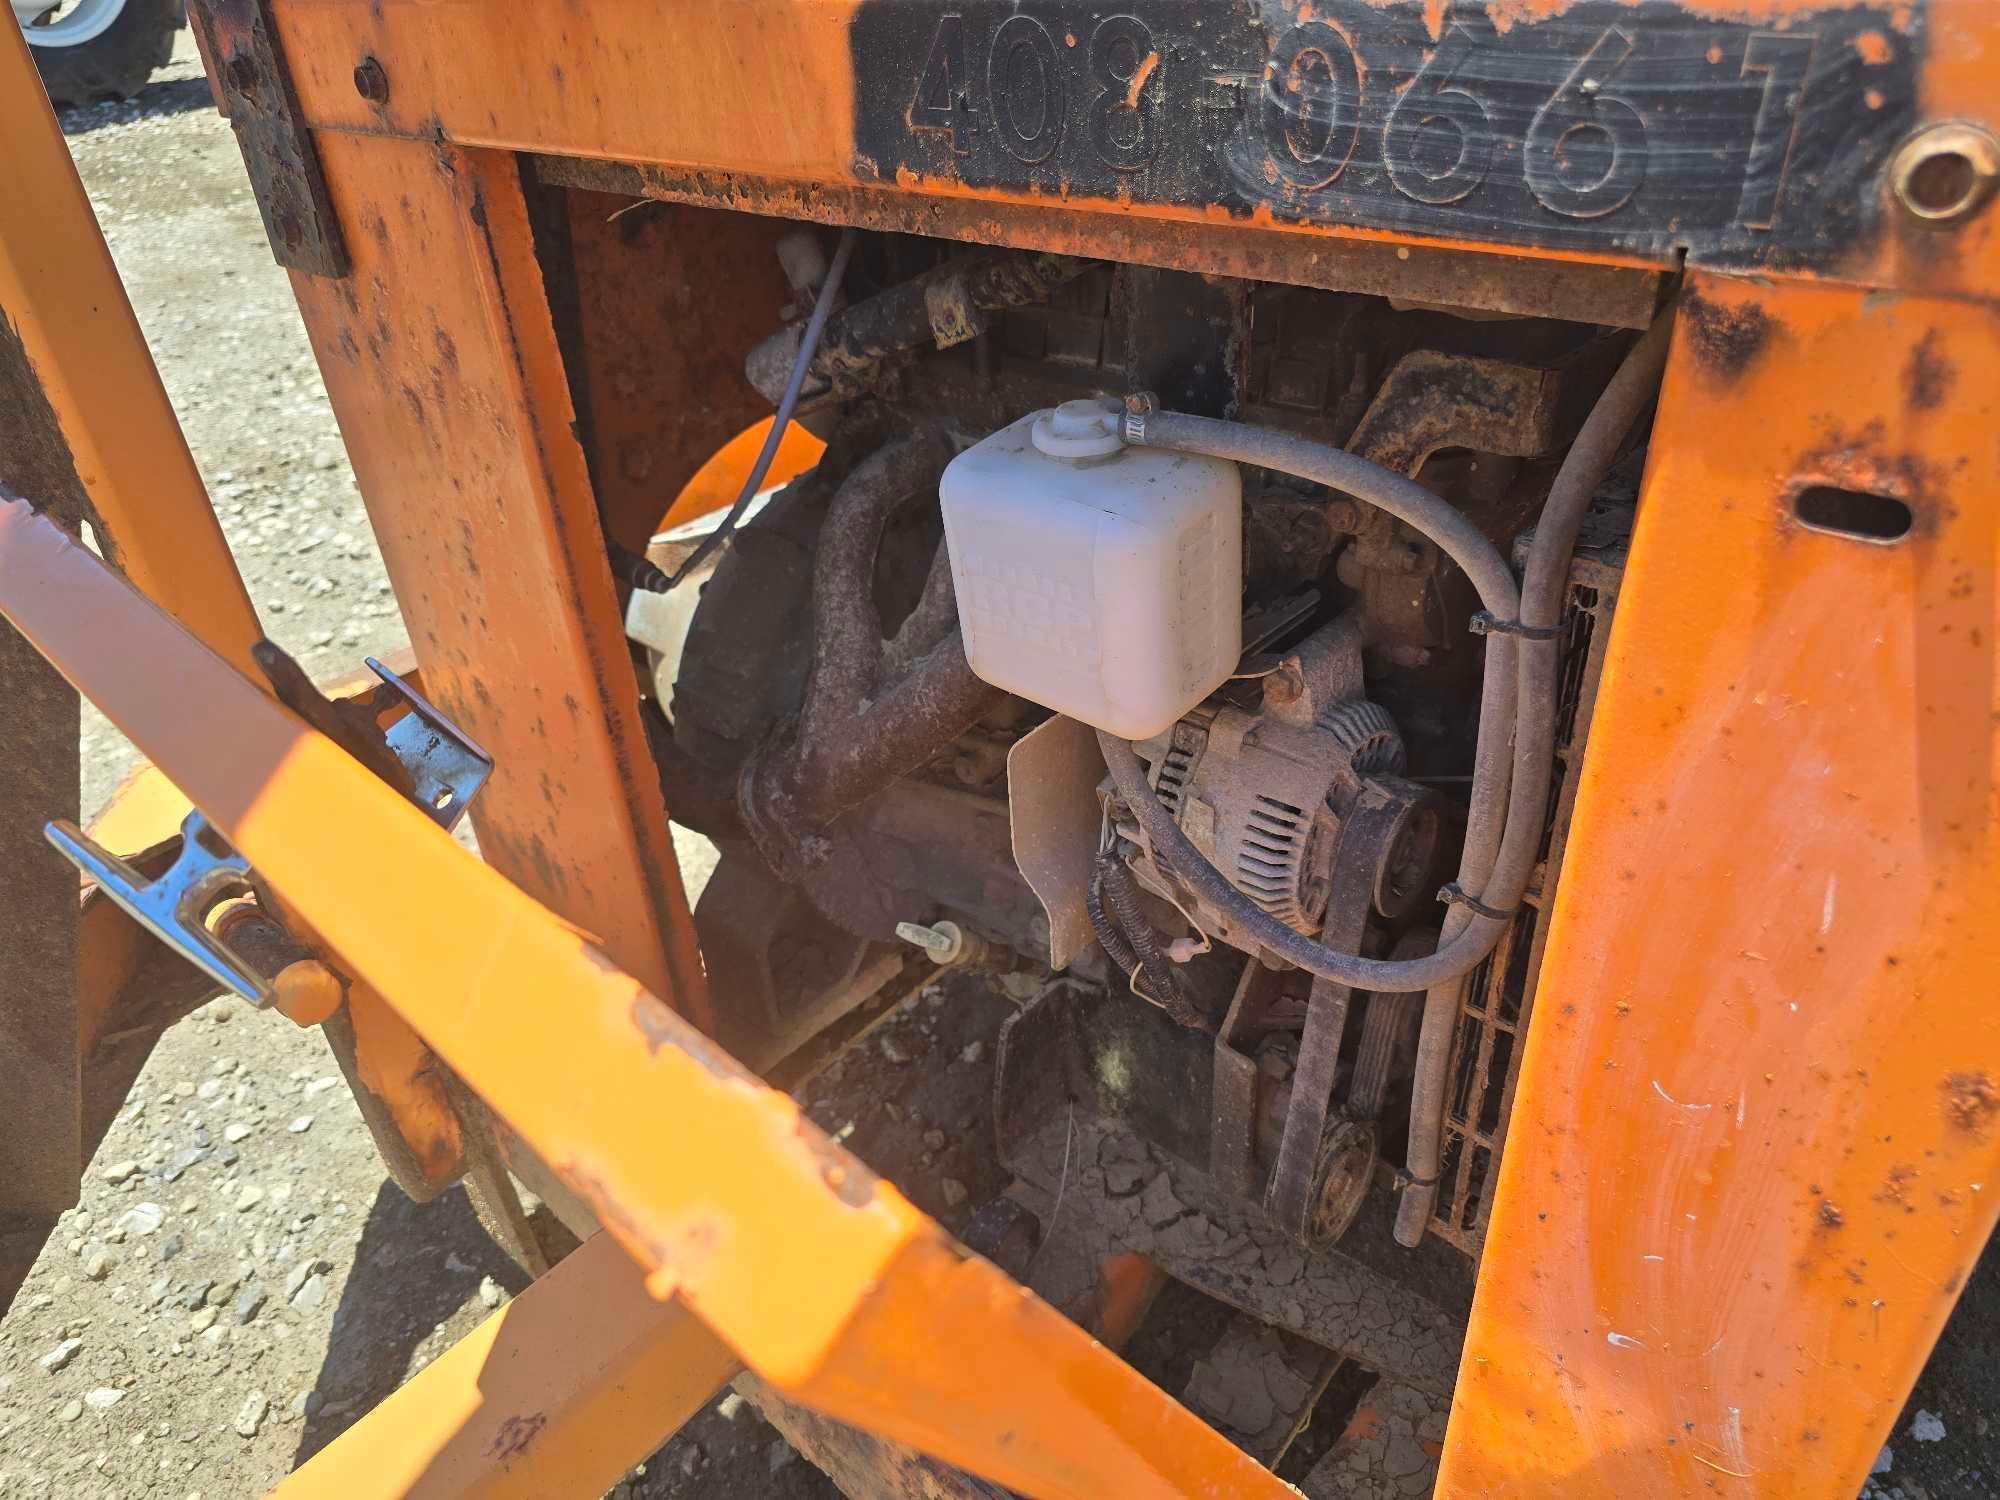 ALTEC WOOD CHIPPER SN: 478723 powered by Kubota diesel engine, equipped with 12in. Chipping